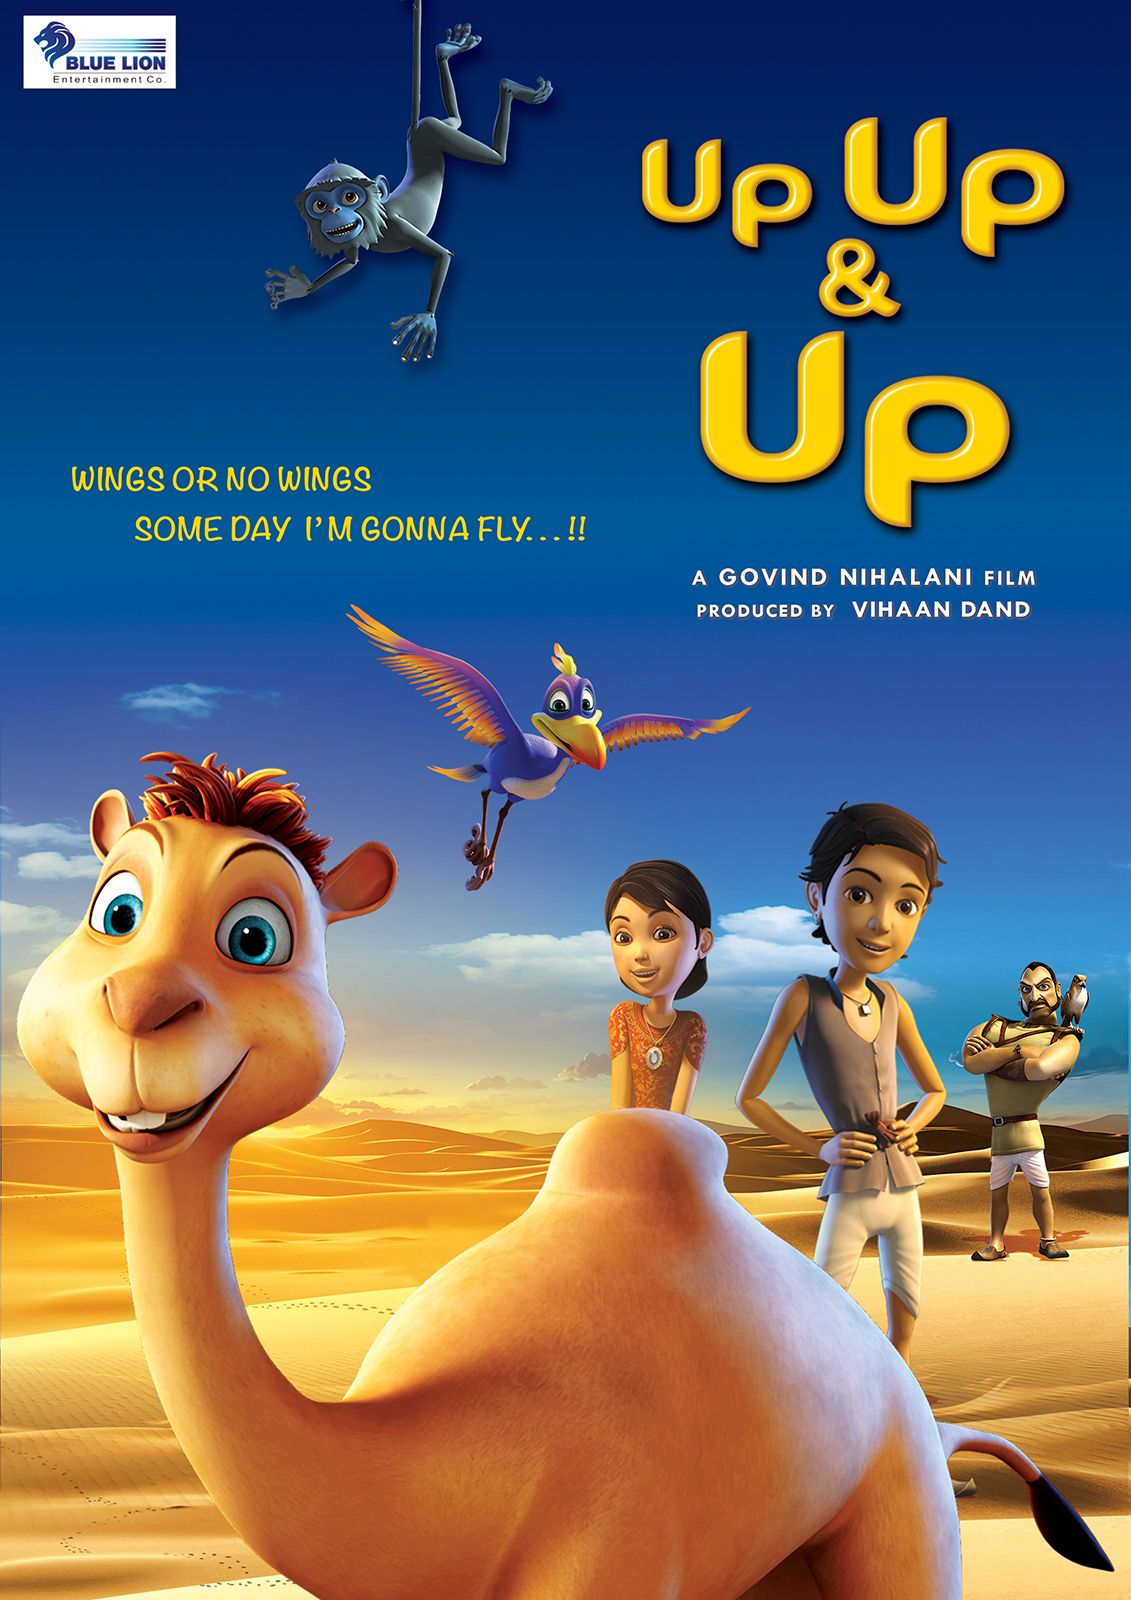 Up Up & Up (2019) Hindi Dubbed download full movie